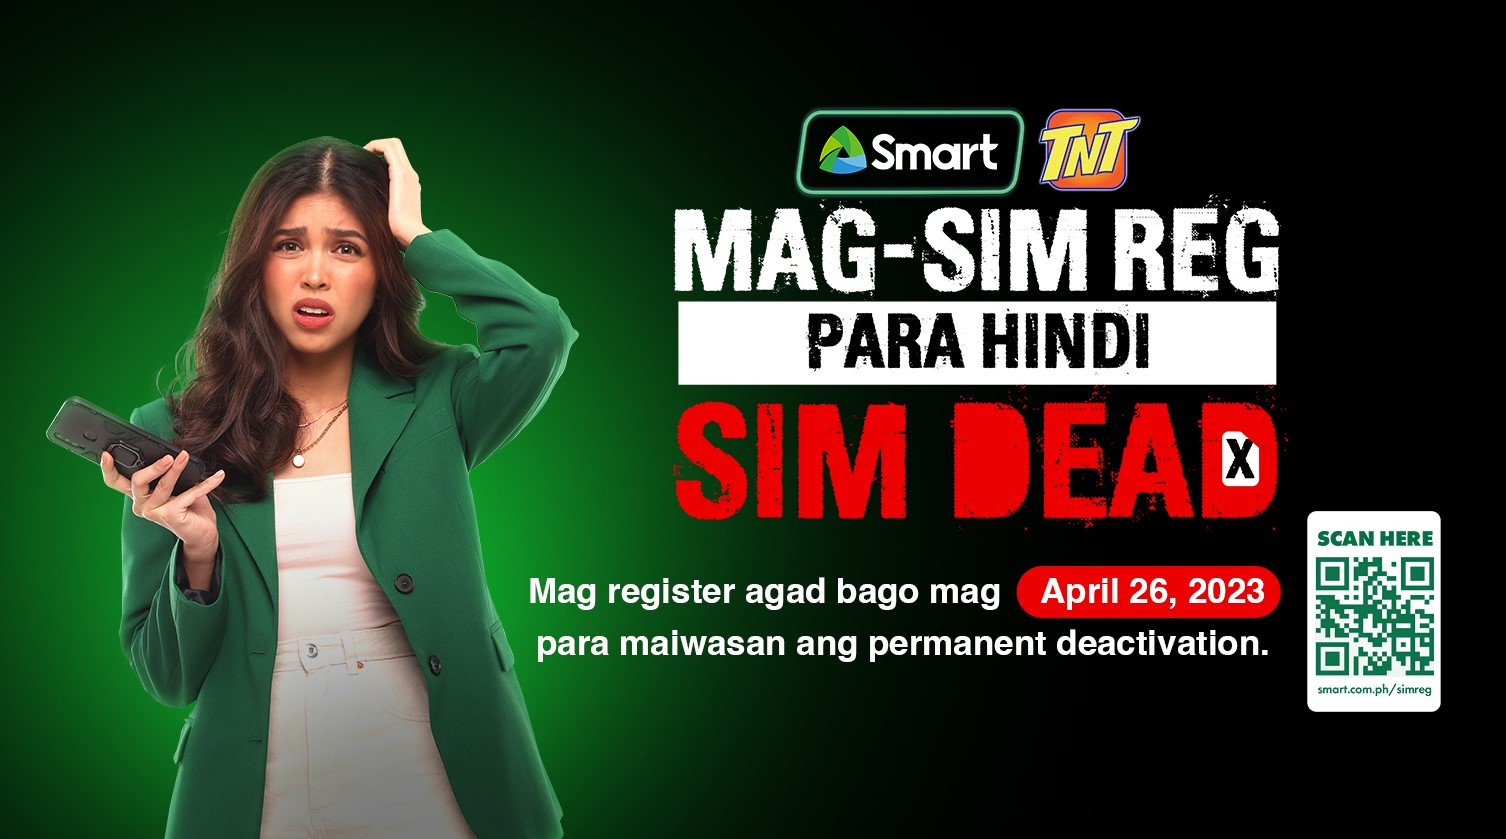 Smart Ramps up SIM Registration Drive with its New Campaign